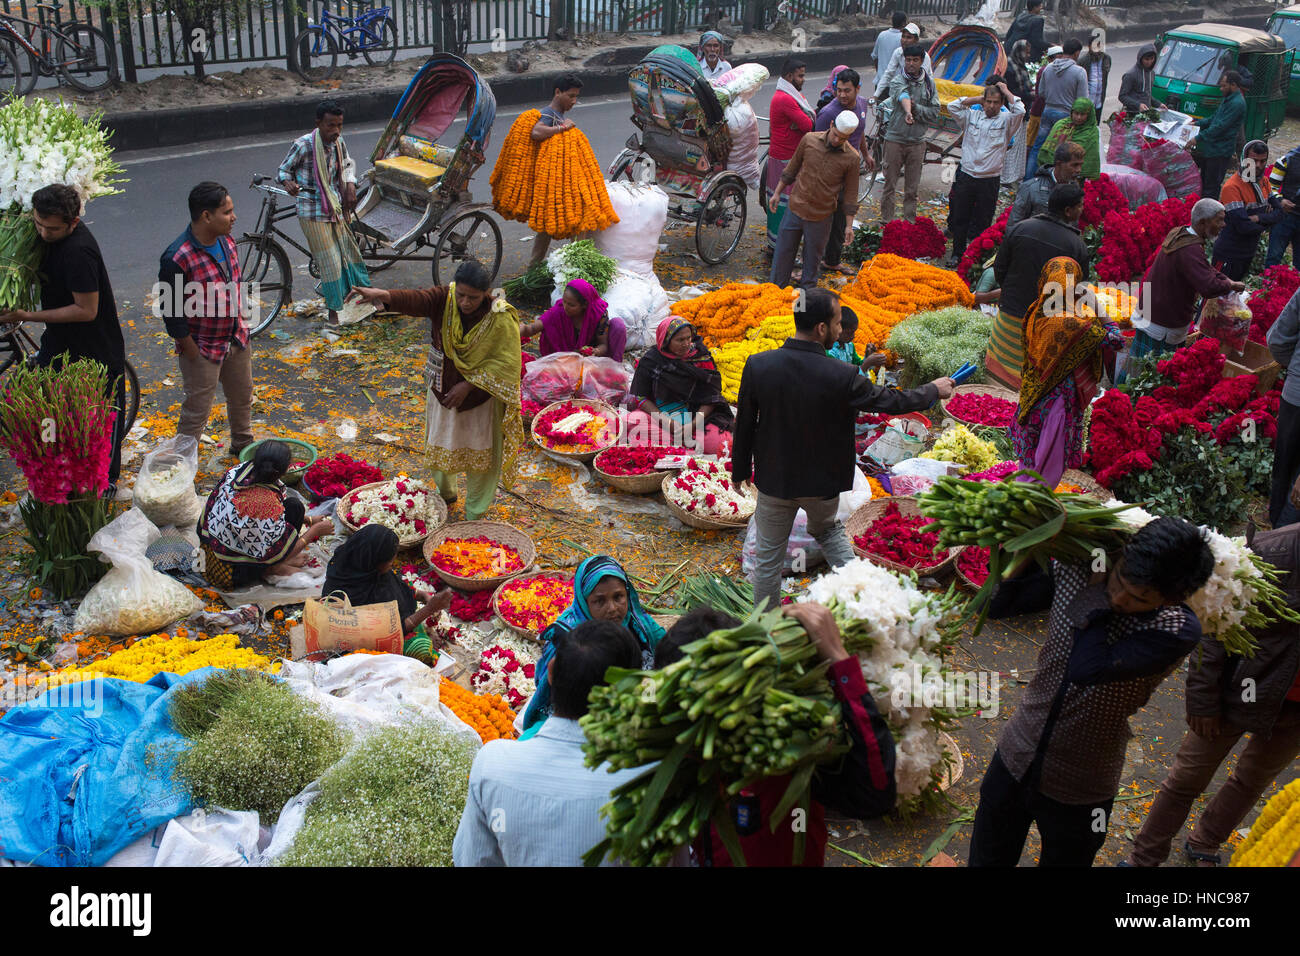 Dhaka, Bangladesh. 11th February 2017.People are busy with trade of flower in Shahbag flower market in Dhaka, Bangladesh on February 11, 2017. Thousand of people come this market at early morning to buy flowers as vendors bring their bloom from the southern region of the country.  Shahbag is famous for the flower market. It is the largest flower market of Bangladesh. Here flower are sell in whole-sell and retail price.These flowers are come from different districs in Bangladesh. Credit: zakir hossain chowdhury zakir/Alamy Live News Stock Photo